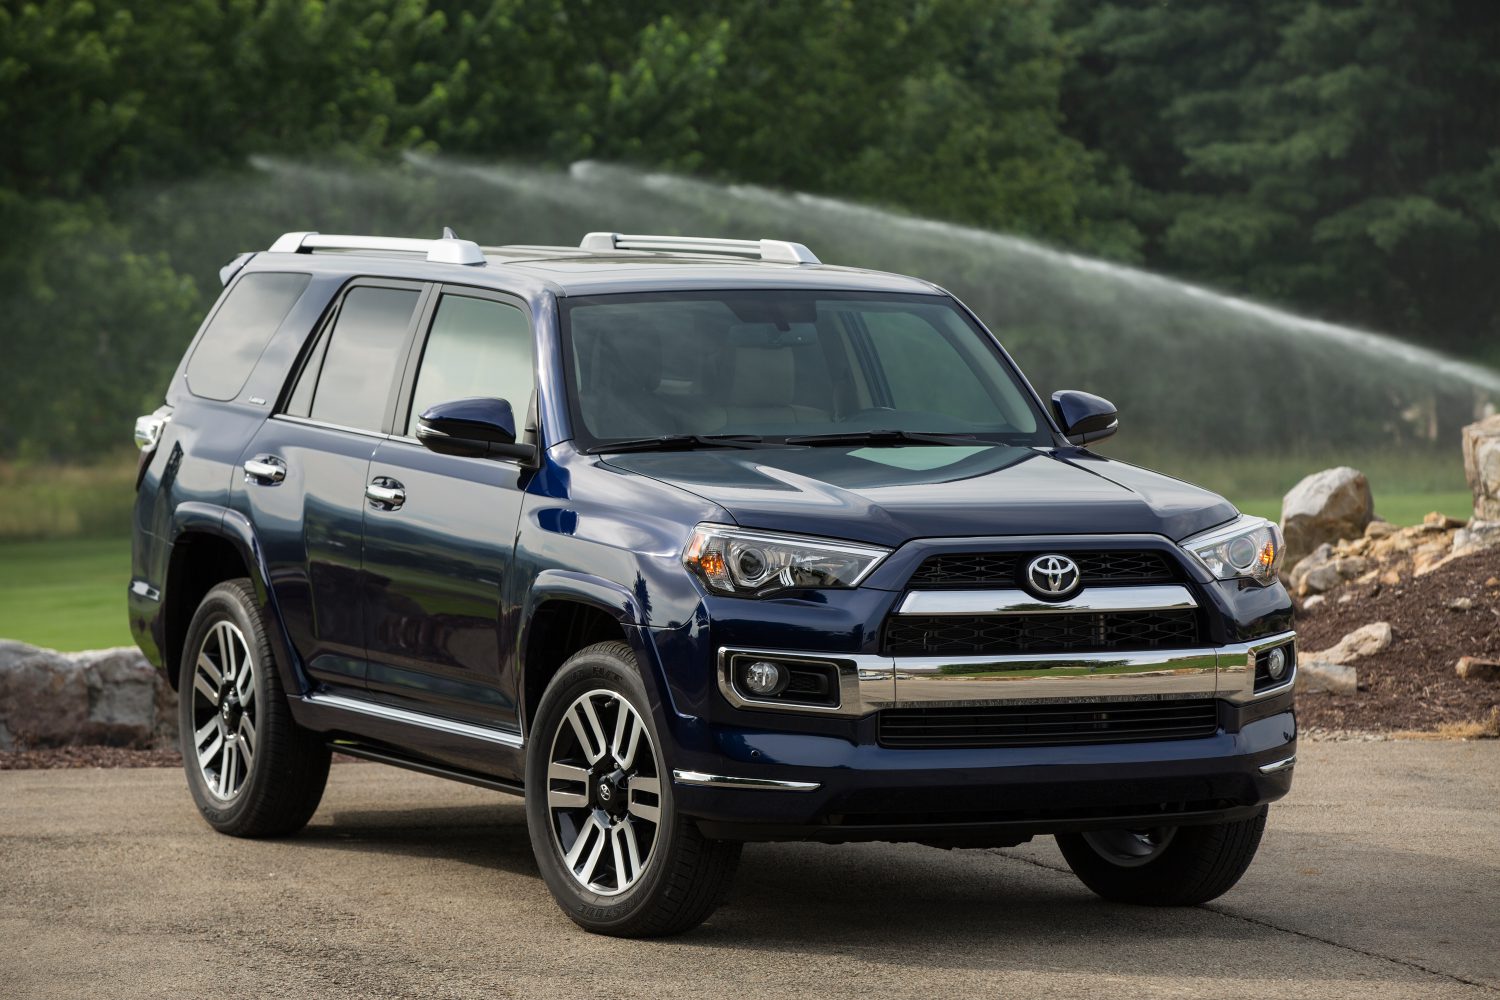 Multi-tool on Wheels: 2017 Toyota 4Runner is the Everyday SUV That Lets You  Explore When You Want, Where You Want - Toyota USA Newsroom